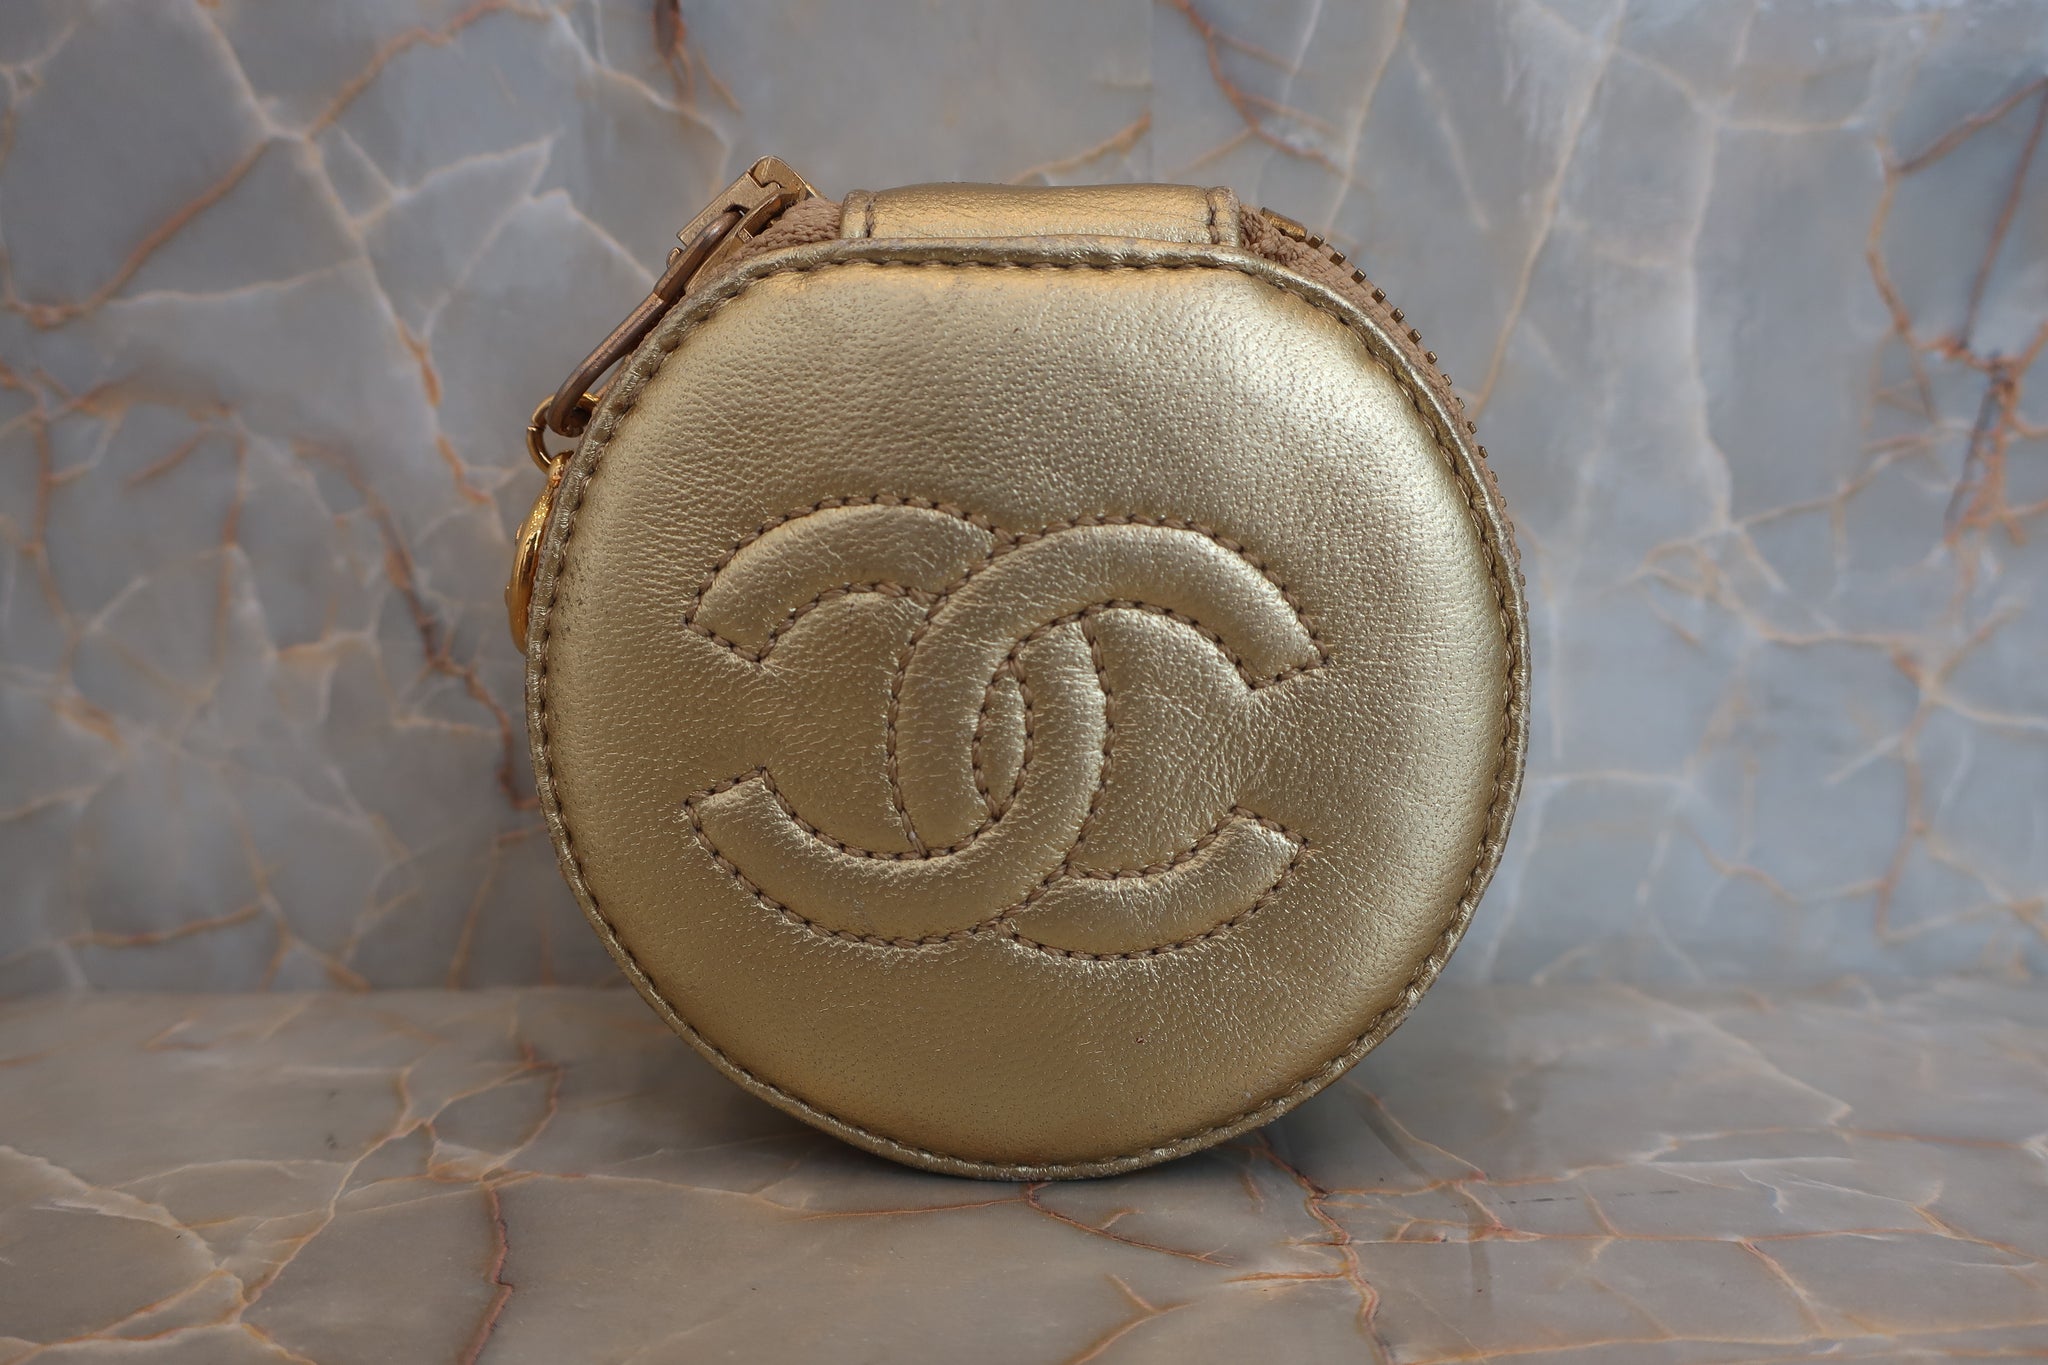 chanel jewellery pouch